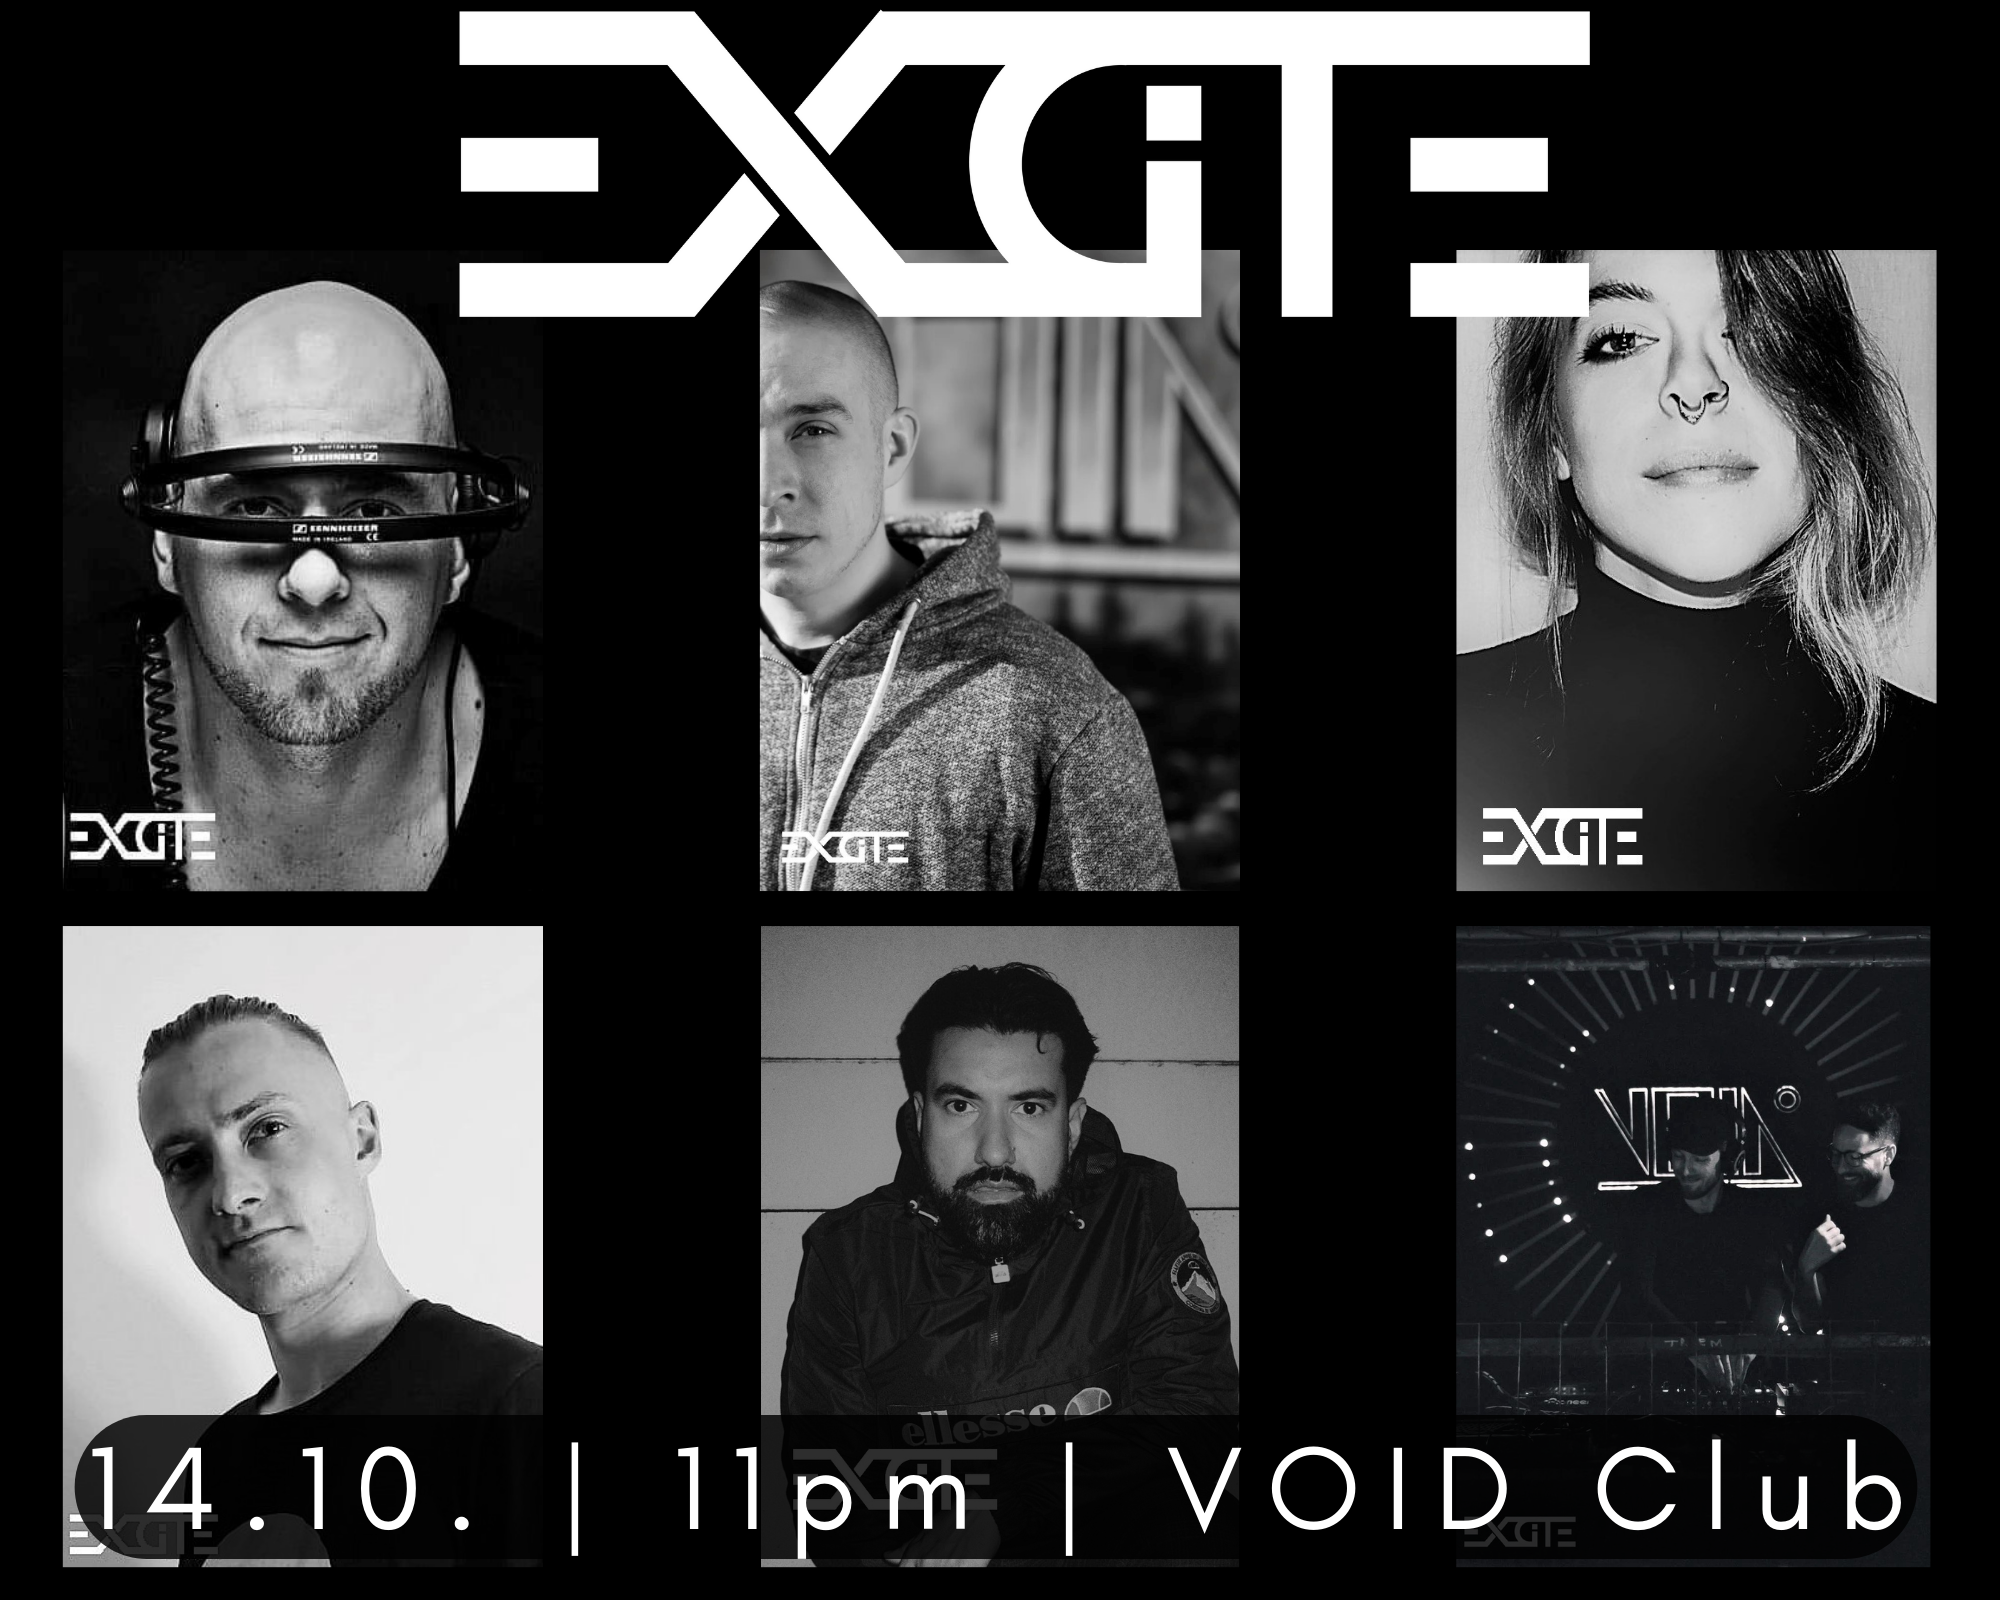 Abandoned Ground 11 w/ Millbrook, Viper XXL at VOID Club & Hall in